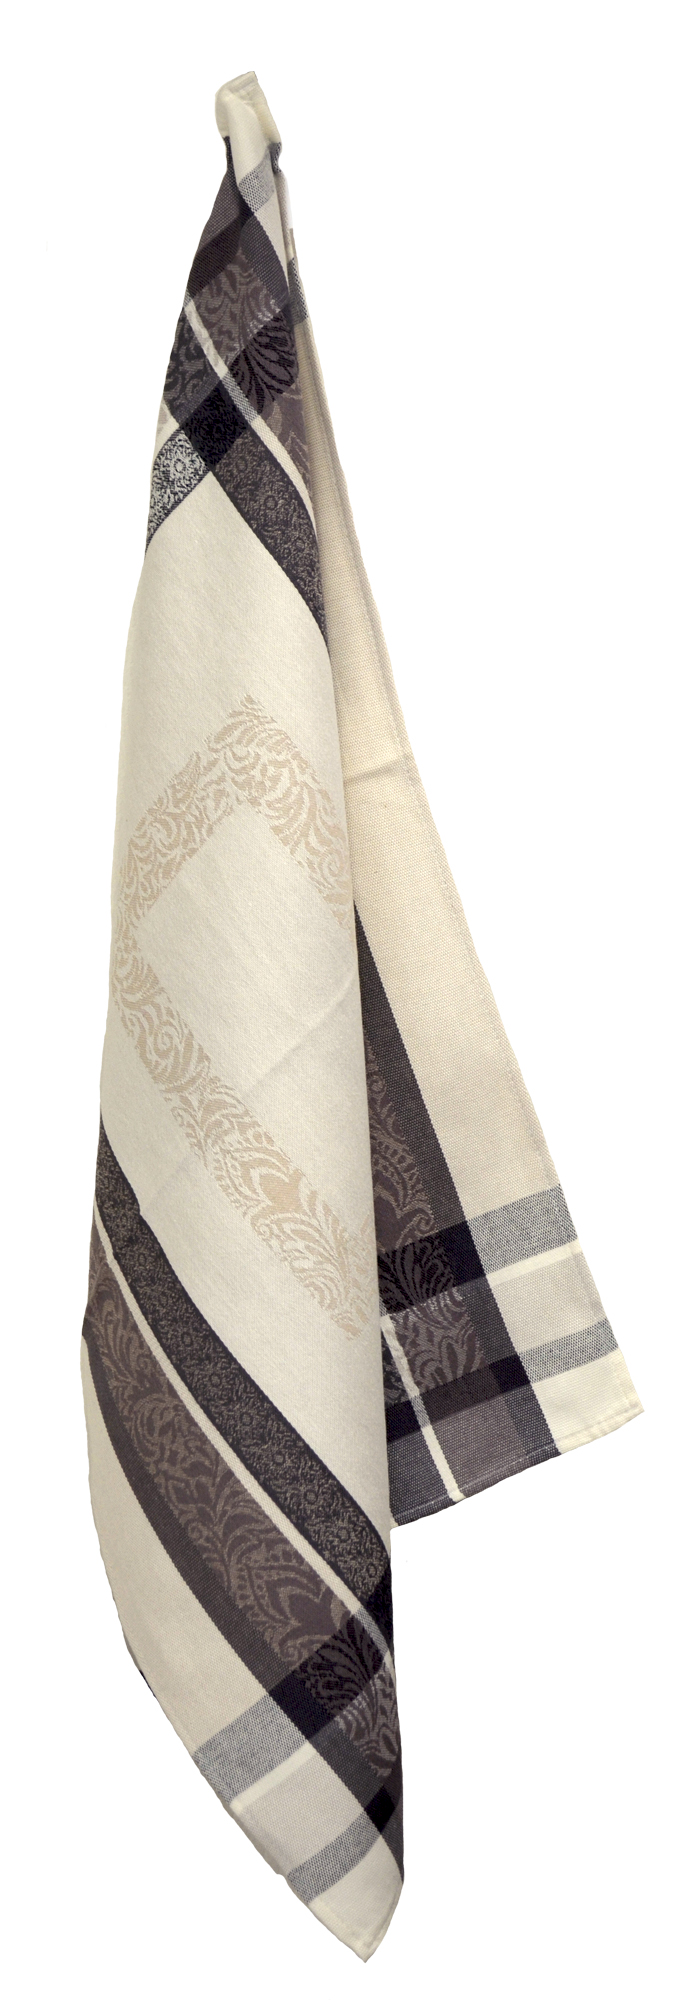 Floral French Jacquard Tea Towel - Collection "Bargeme" Cream/Grey, Size: 21 x 27 inches, Price CAN$19.95